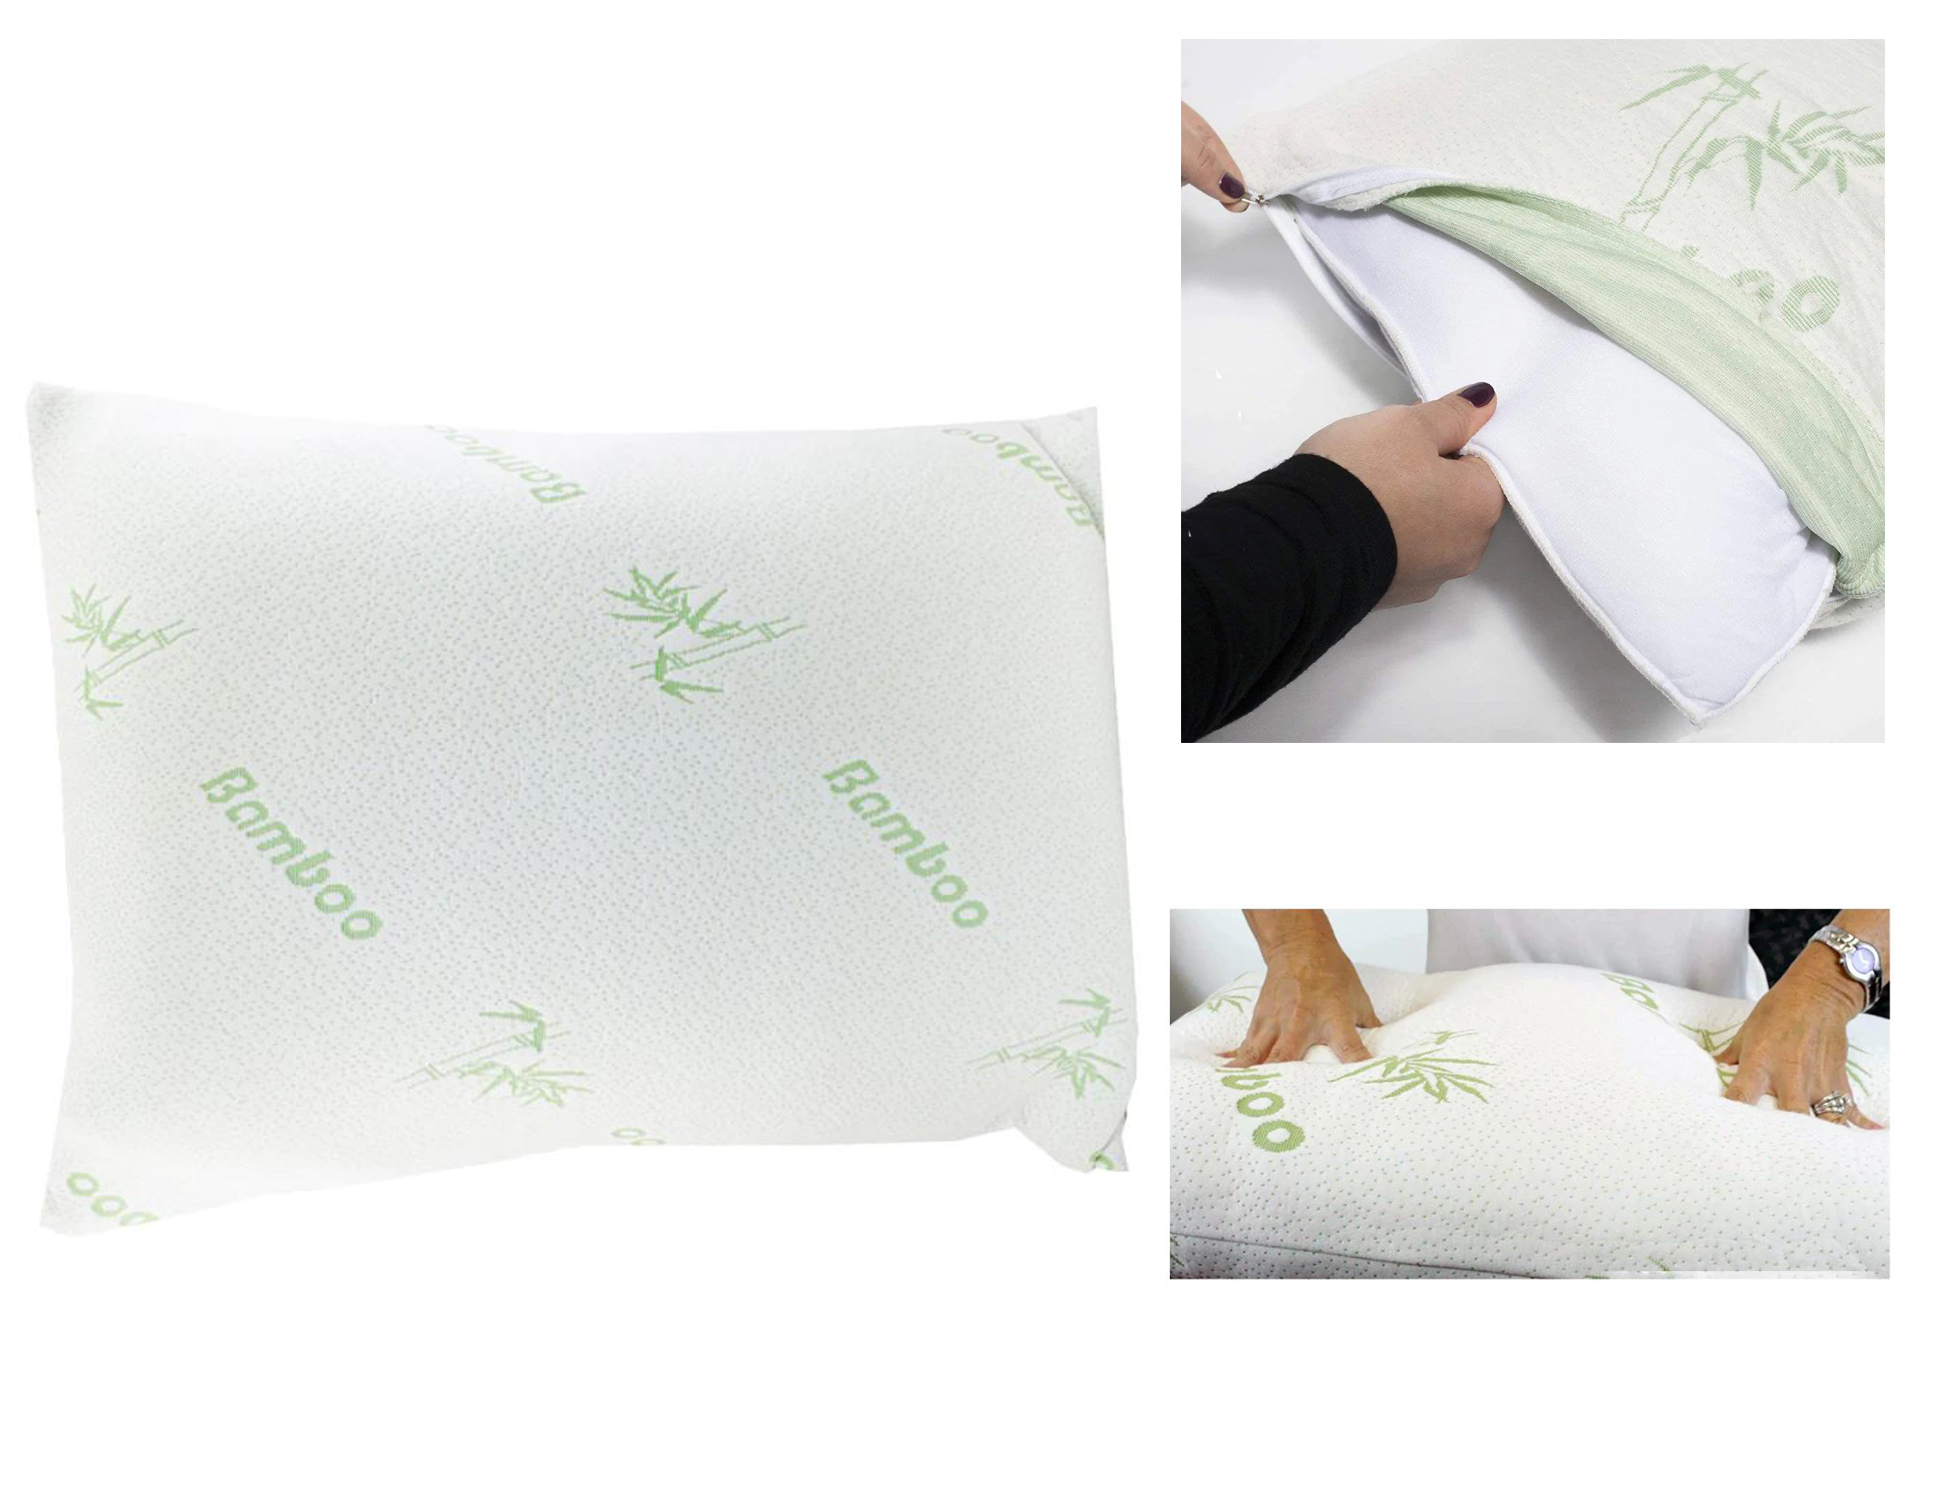 ''18'''' X 26'''' Memory Foam PILLOWs w/ PILLOW Protector Cover - White''